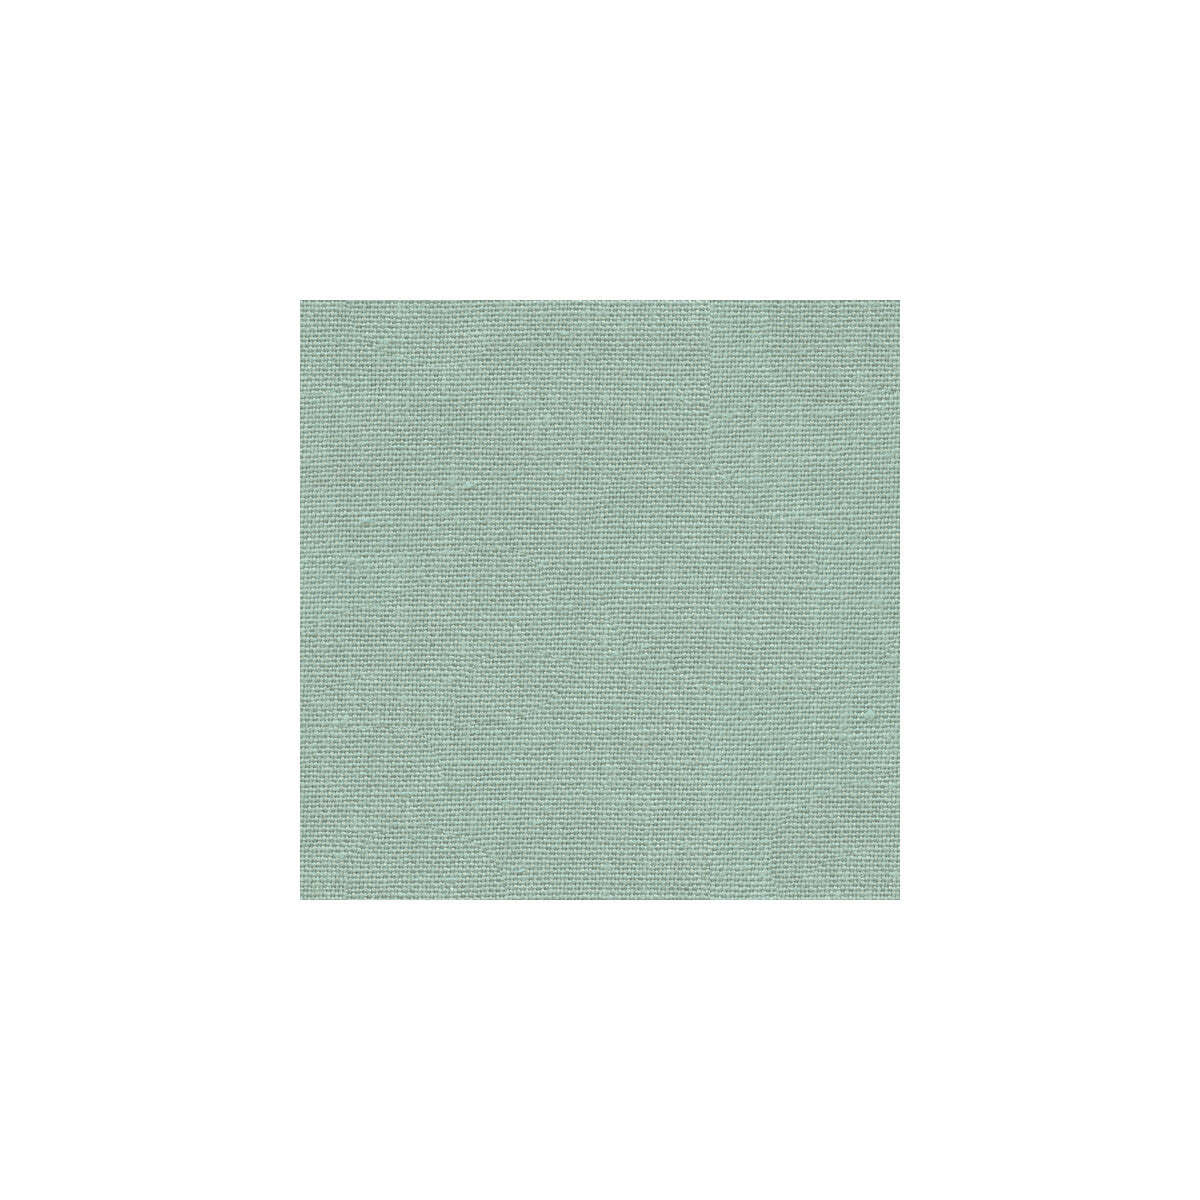 Kravet Basics fabric in 32260-15 color - pattern 32260.15.0 - by Kravet Basics in the Perfect Plains collection